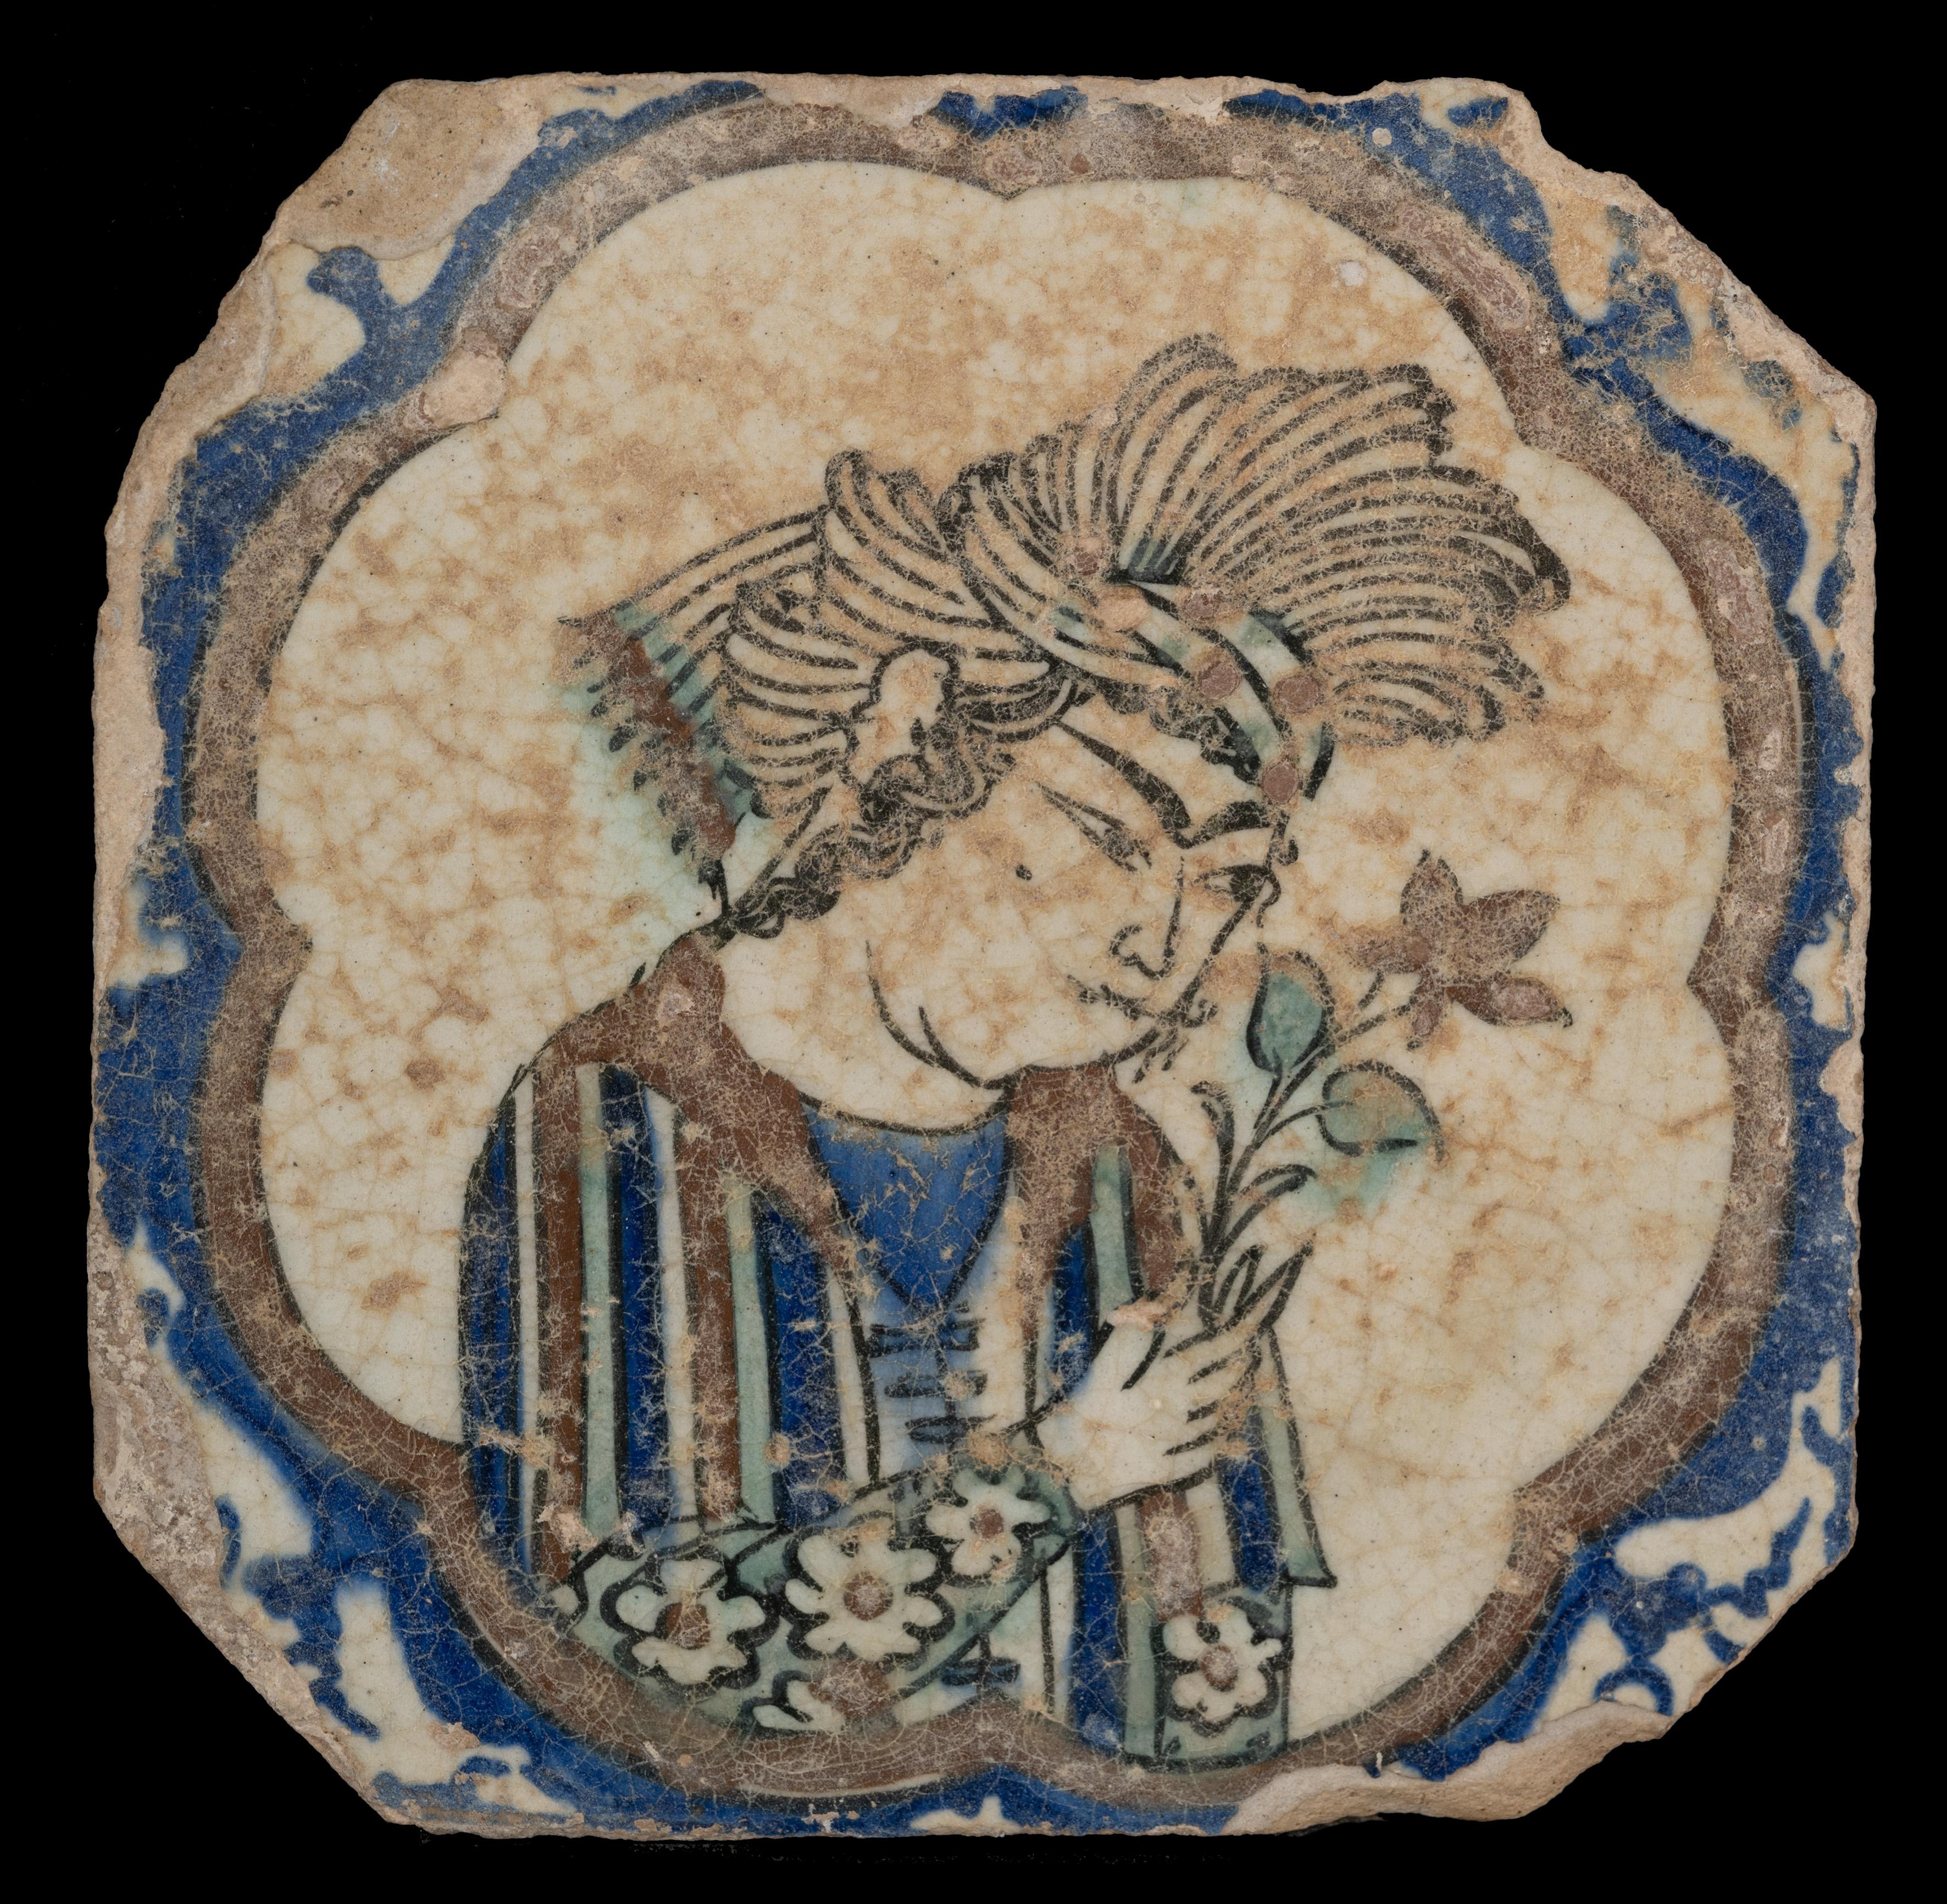 A rare Safavid dynasty (1501-1736) square Kubachi figural pottery tile C 1600.
Tile, with underglaze decoration painted in cobalt blue, green, ochre, and outlined in black, with a central lobed cartouche enclosing a figure holding a flower. Such